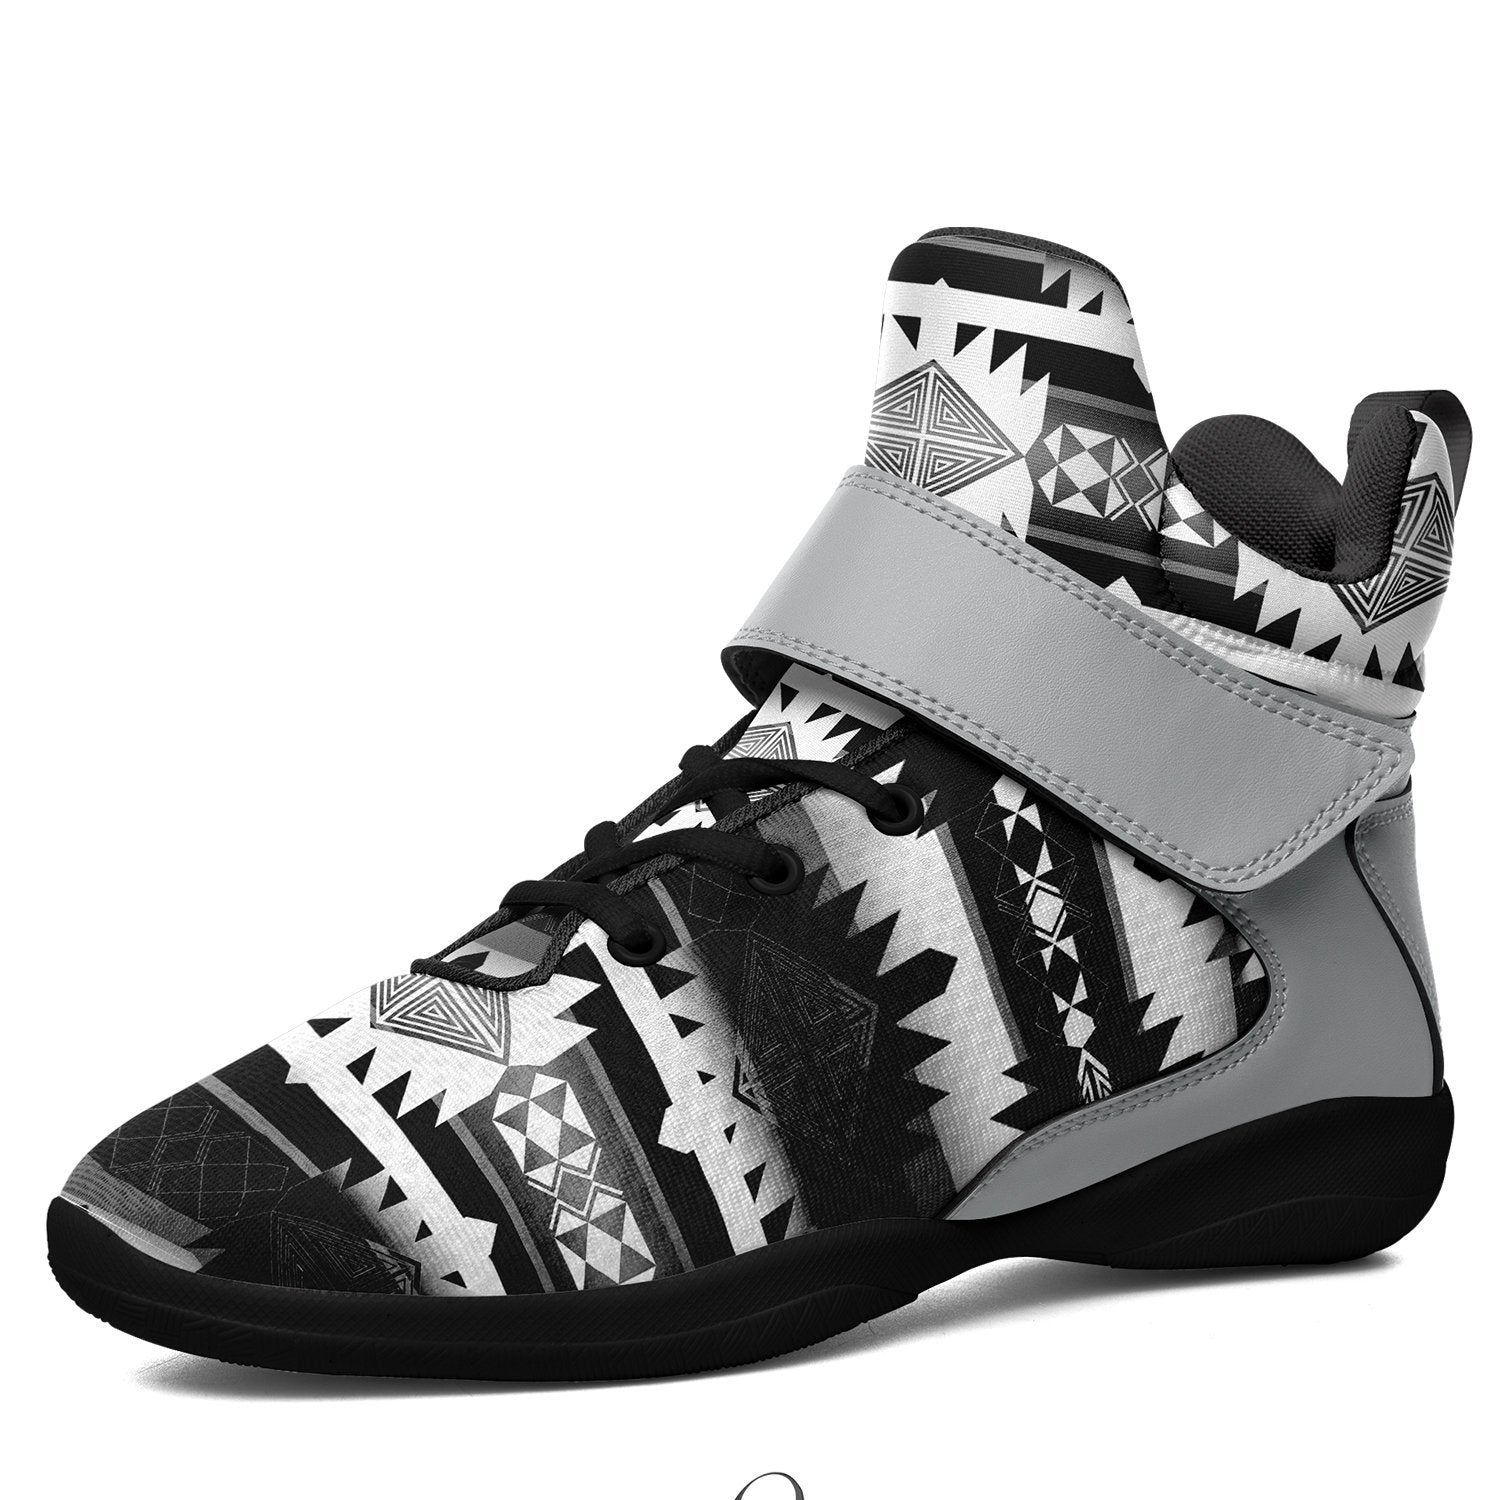 Okotoks Black and White Ipottaa Basketball / Sport High Top Shoes - Black Sole 49 Dzine US Men 7 / EUR 40 Black Sole with Gray Strap 